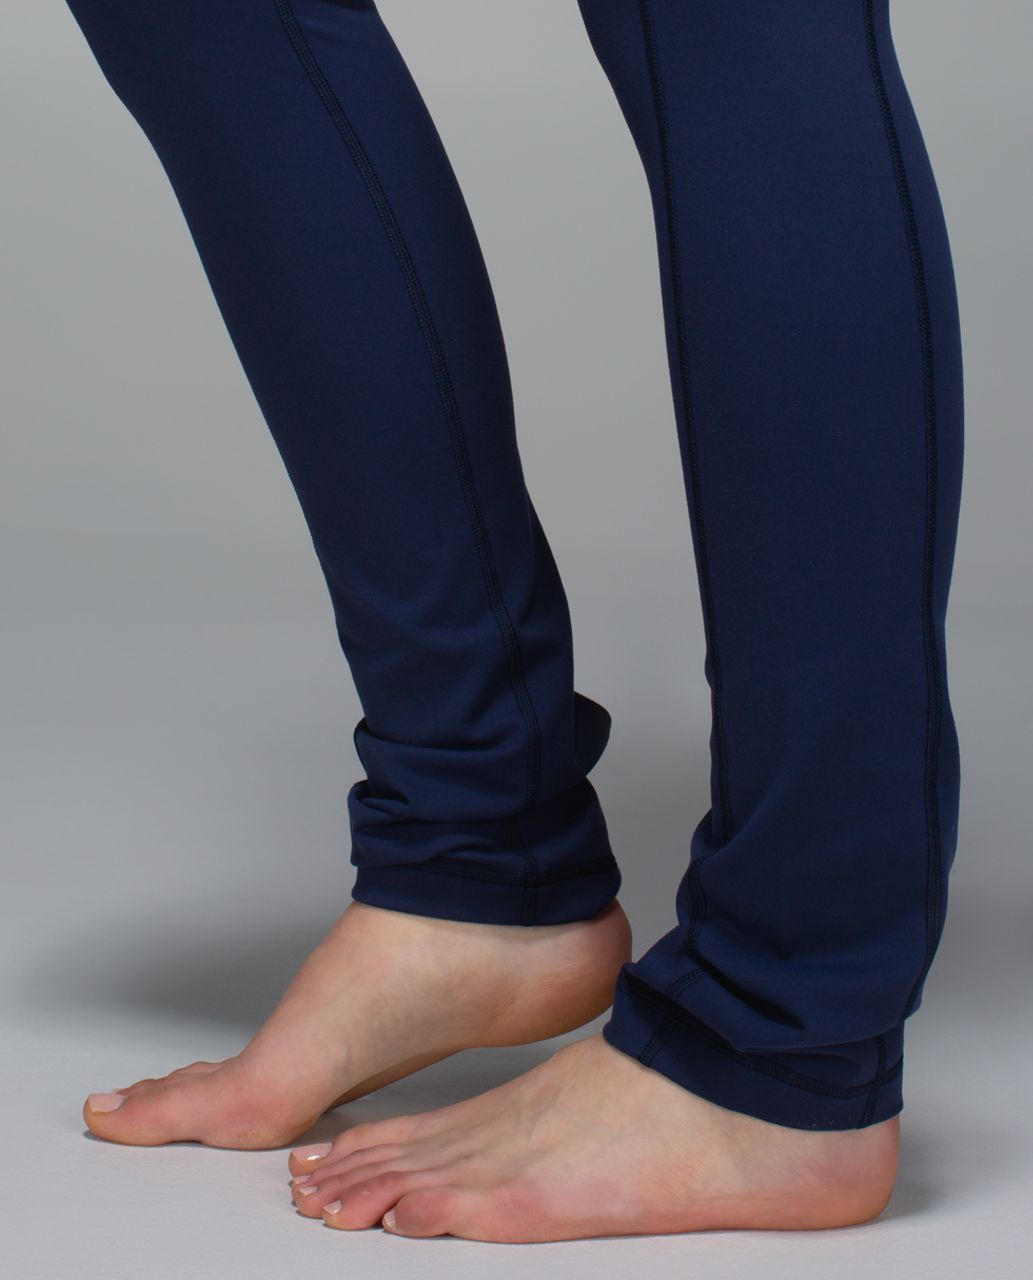 ❤️ LULULEMON Groove Pant Flare Super High Rise Flared True Navy Blue Size 0  or 4